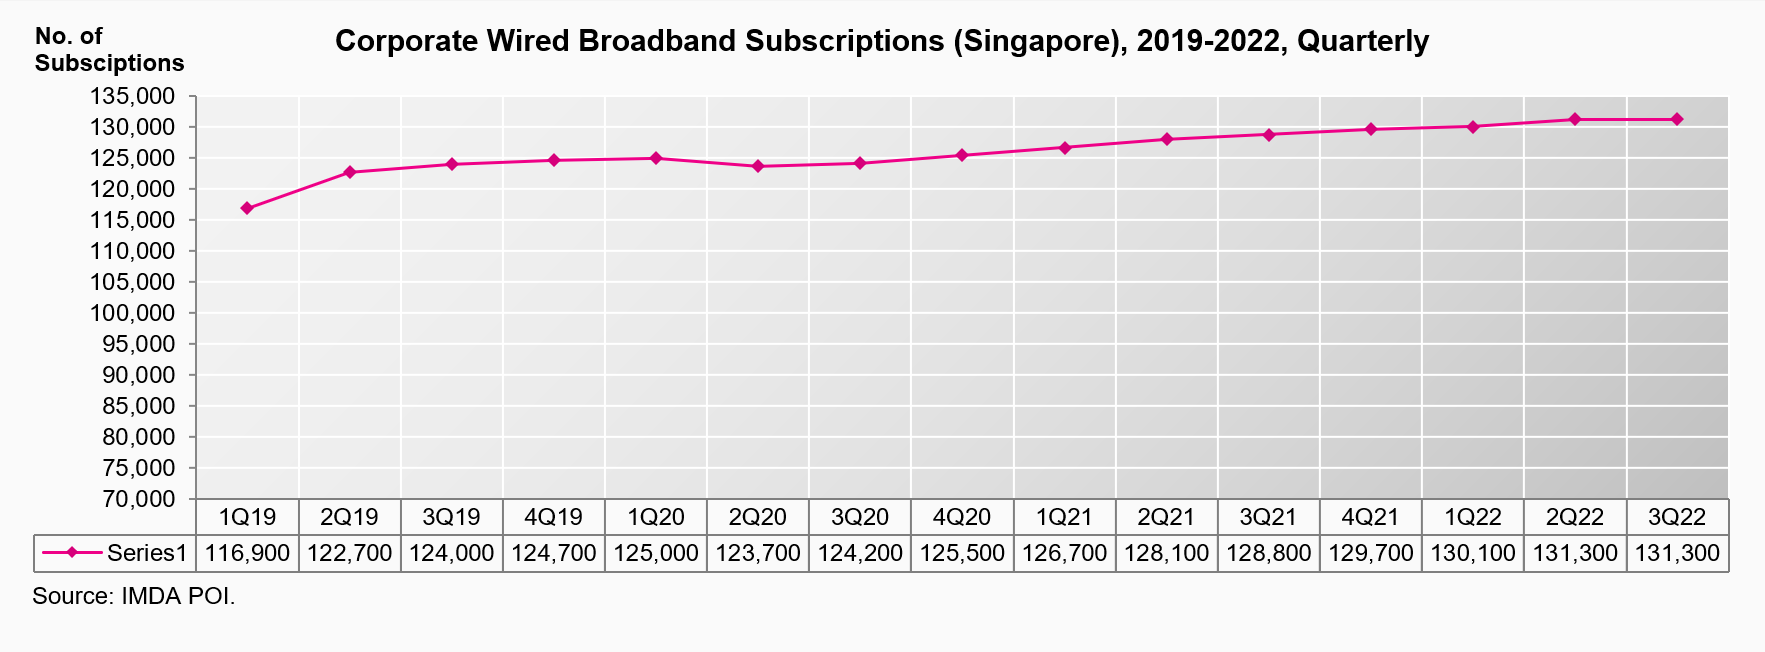 Corporate Wired Broadband Subscriptions (Singapore), 2019-2022, Quarterly